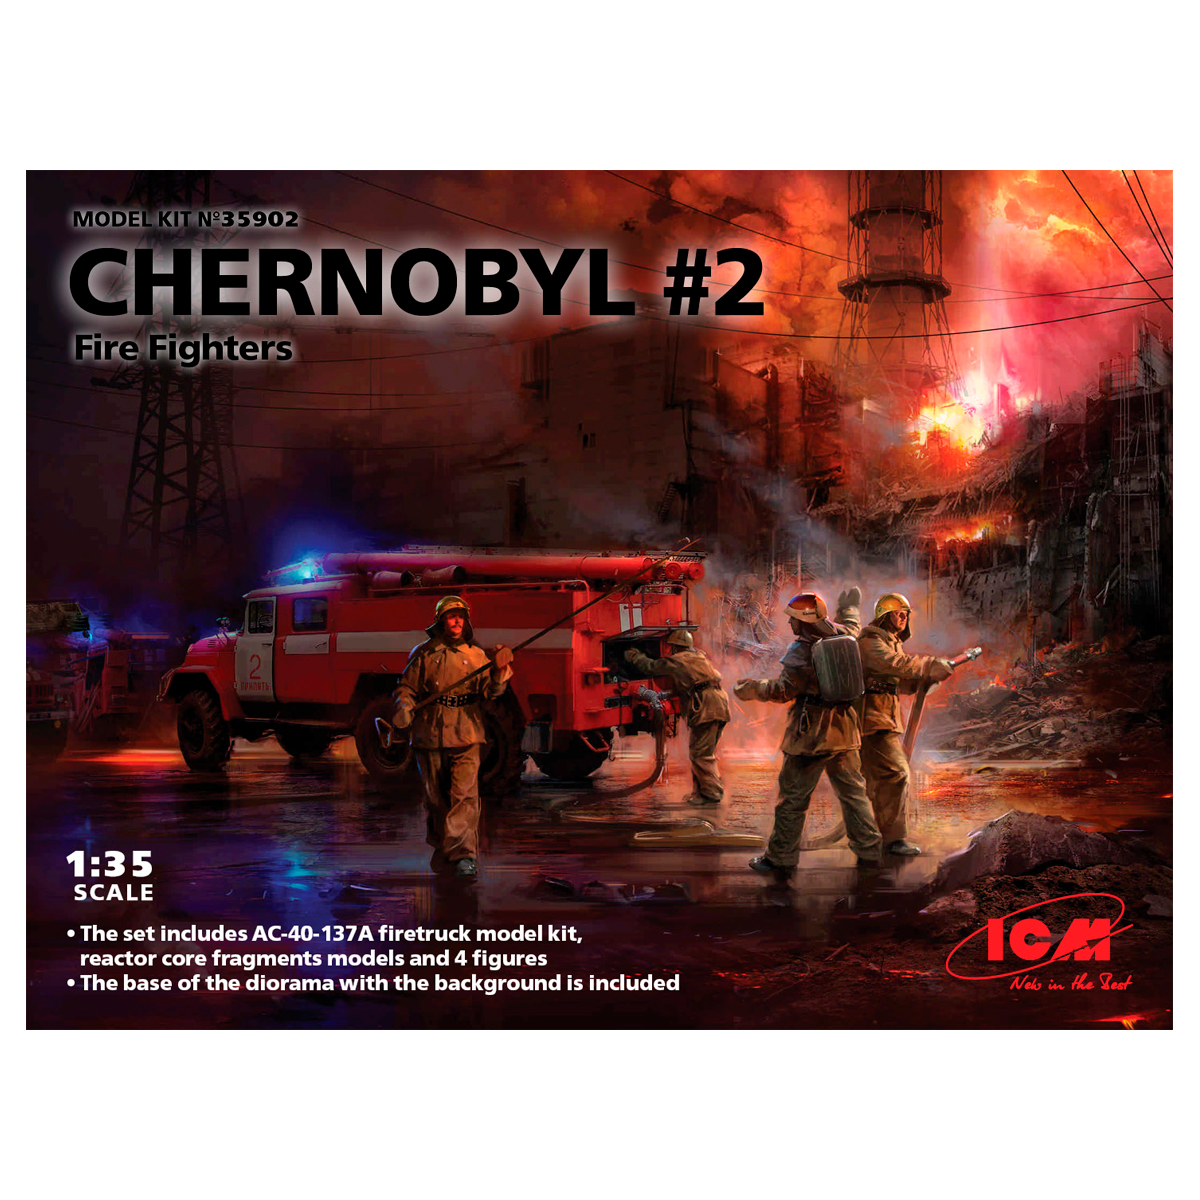 Chernobyl#2. Fire Fighters (AC-40-137A firetruck & 4 figures & diorama base with background) 1/35